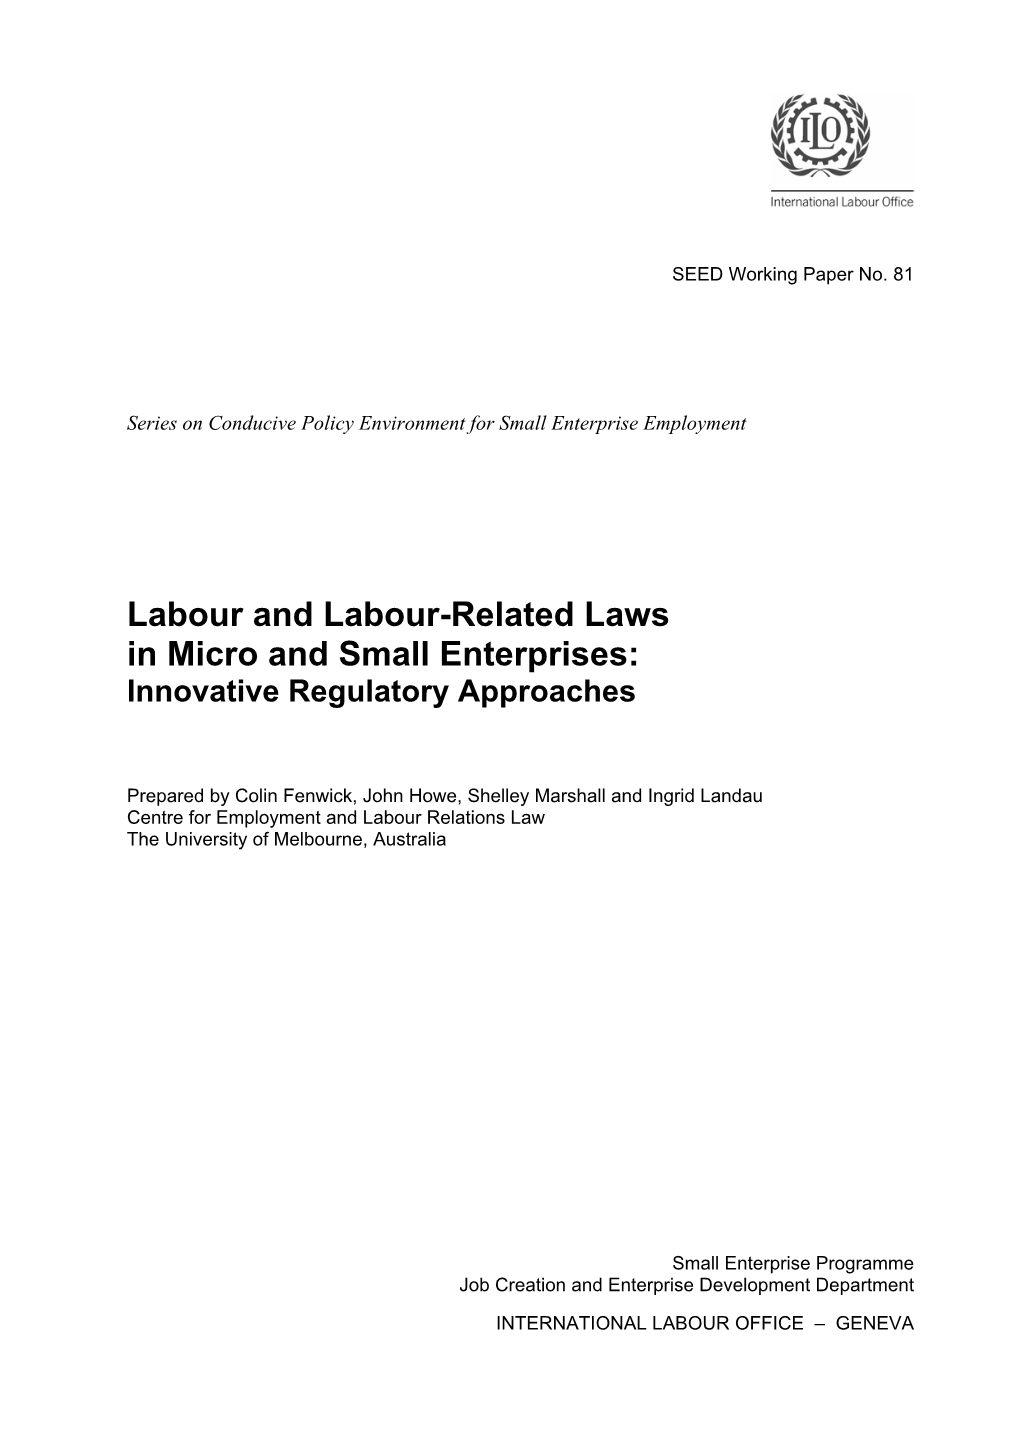 Labour and Labour-Related Laws in Micro and Small Enterprises: Innovative Regulatory Approaches